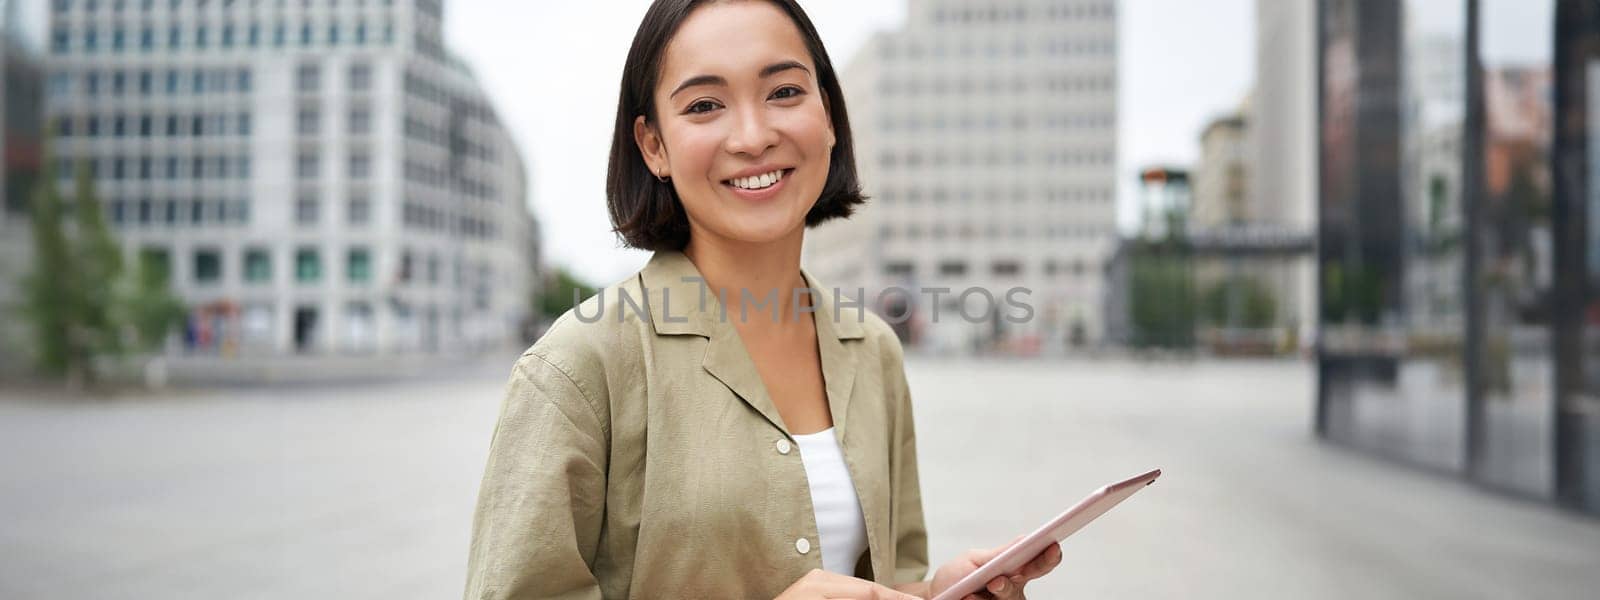 Young smiling asia woman with tablet, standing on street in daylight.